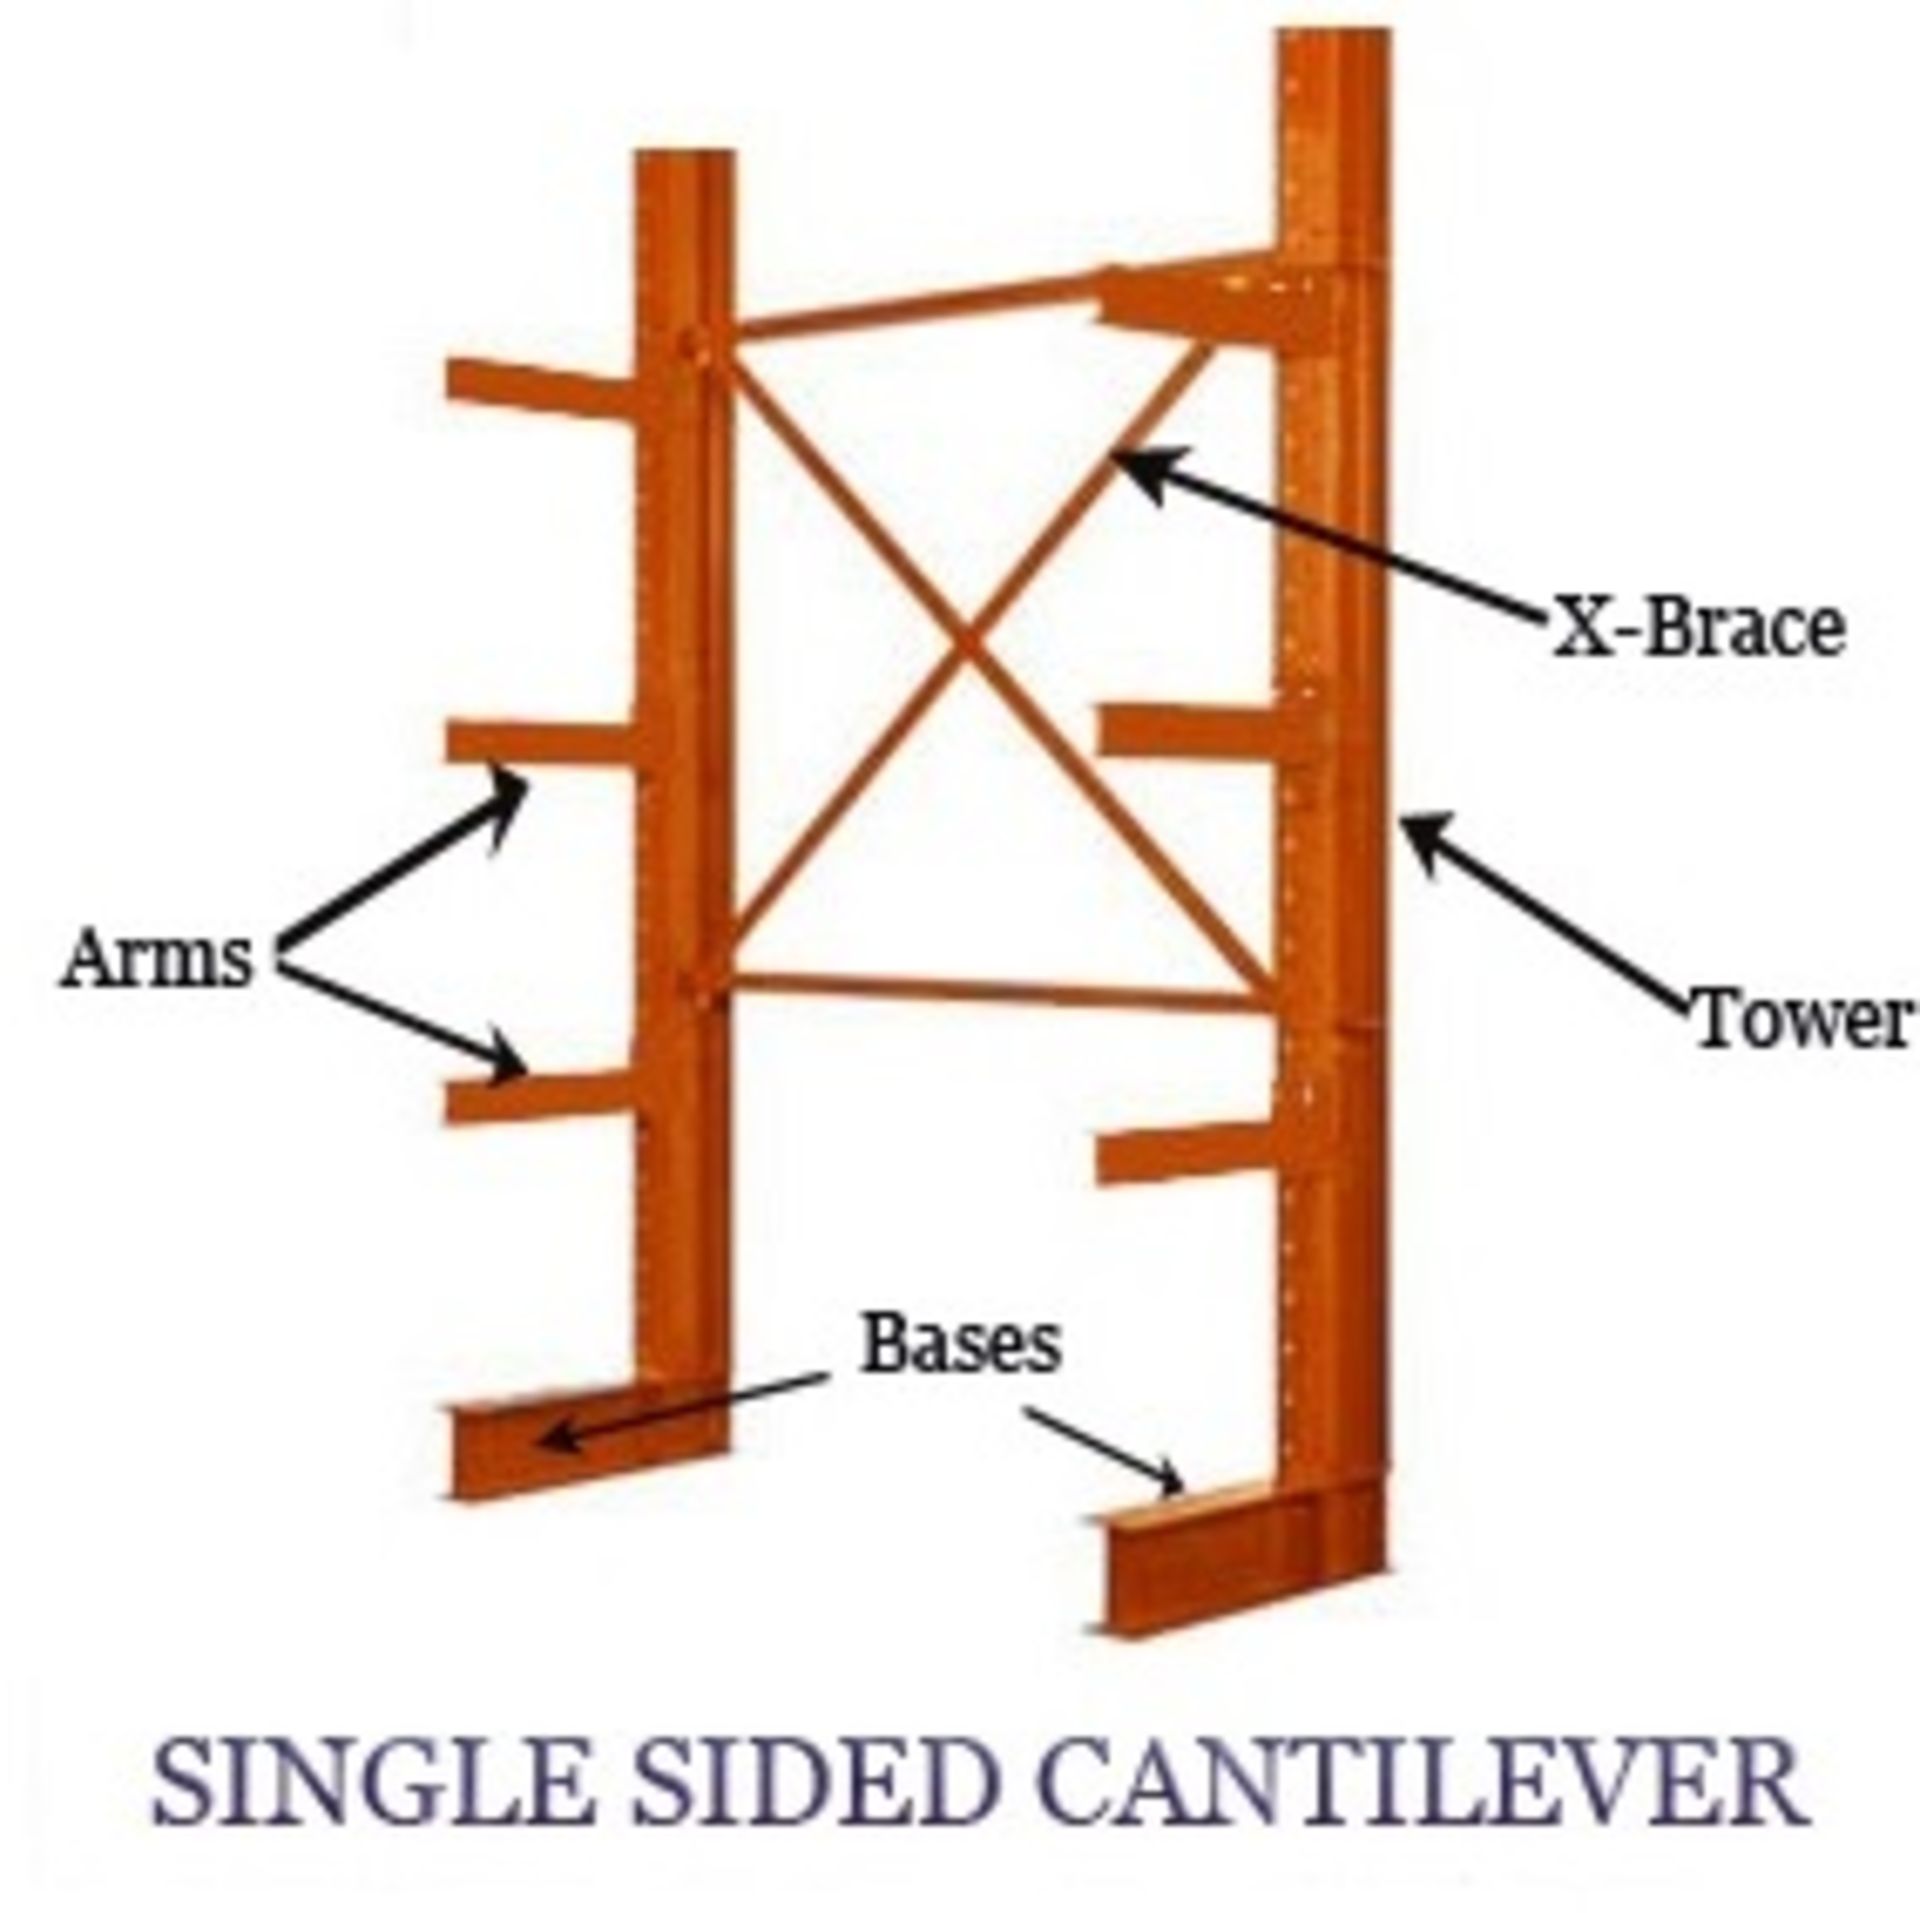 4 SECTIONS OF NEW SINGLE SIDED CANTILEVER, INCLUDES 5 PCS OF 12'H X 8" NEW CANTILEVER STRUCTURAL